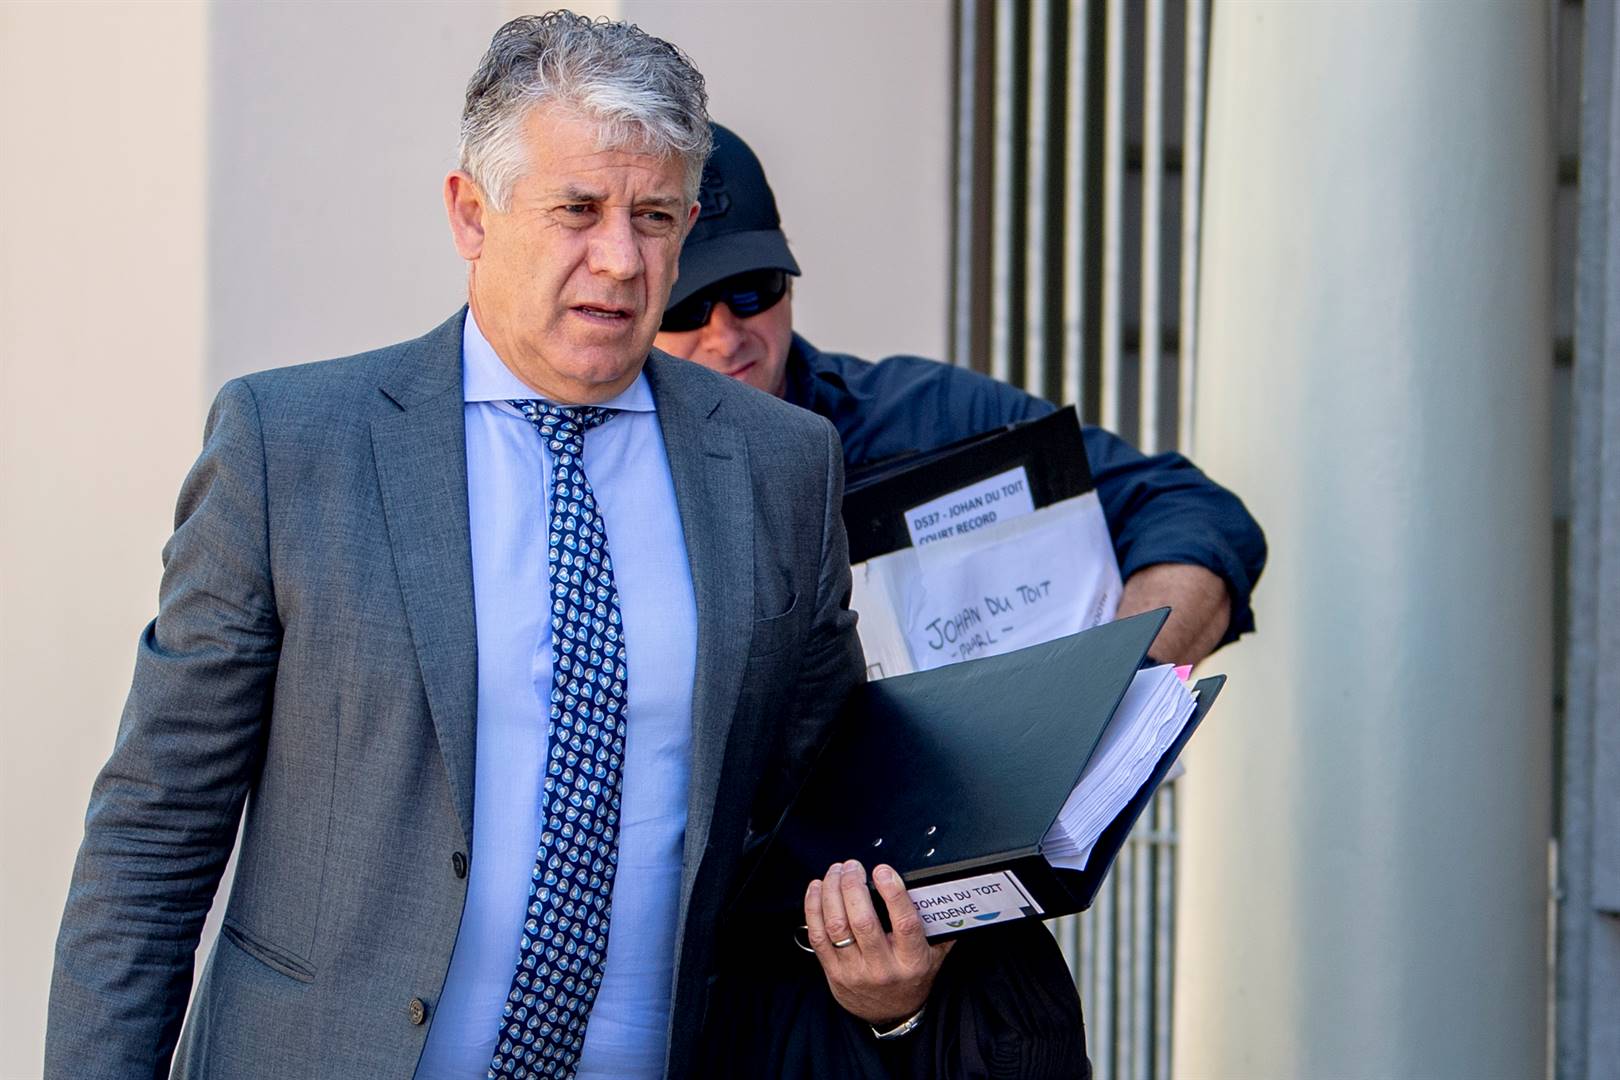 Cape Town lawyer William Booth dodged at least 7 attempts on his life. (Jaco Marais/Netwerk24)